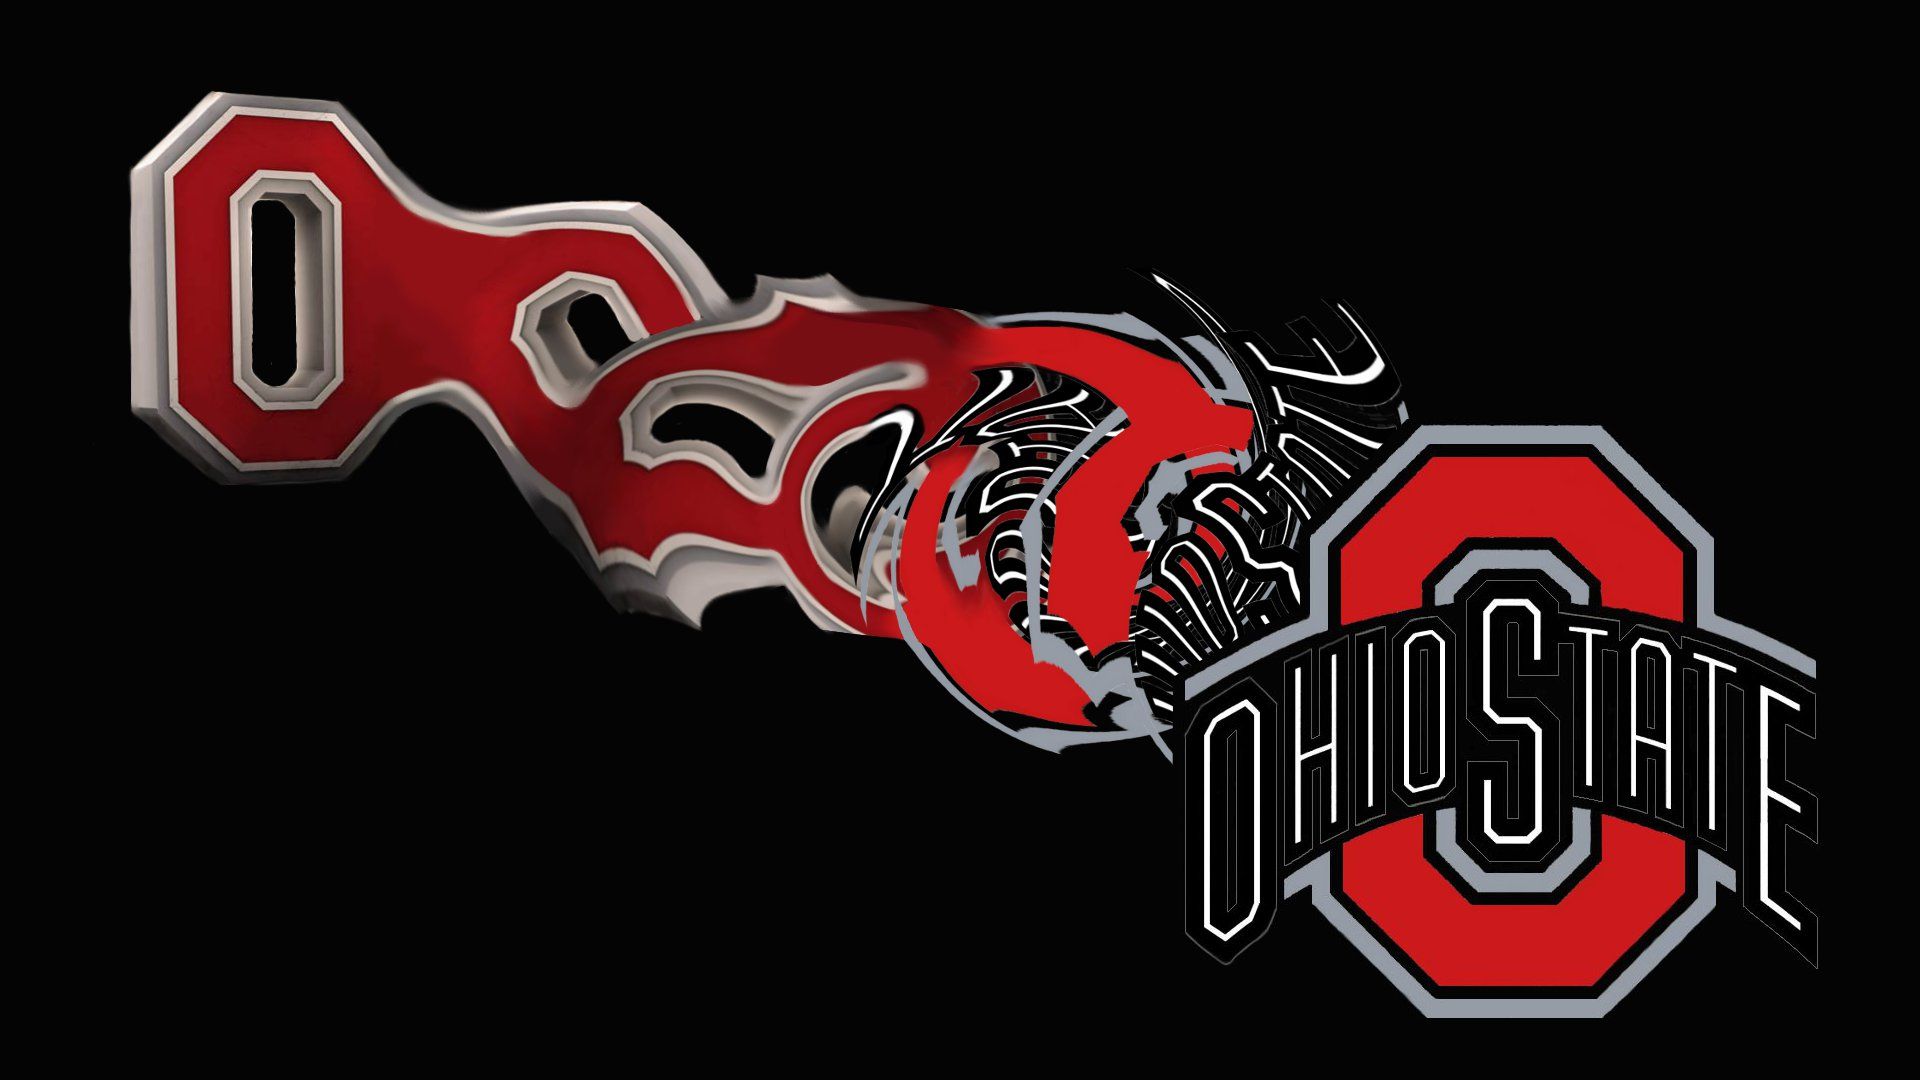 Ohio State Buckeyes Backgrounds - Wallpaper Cave